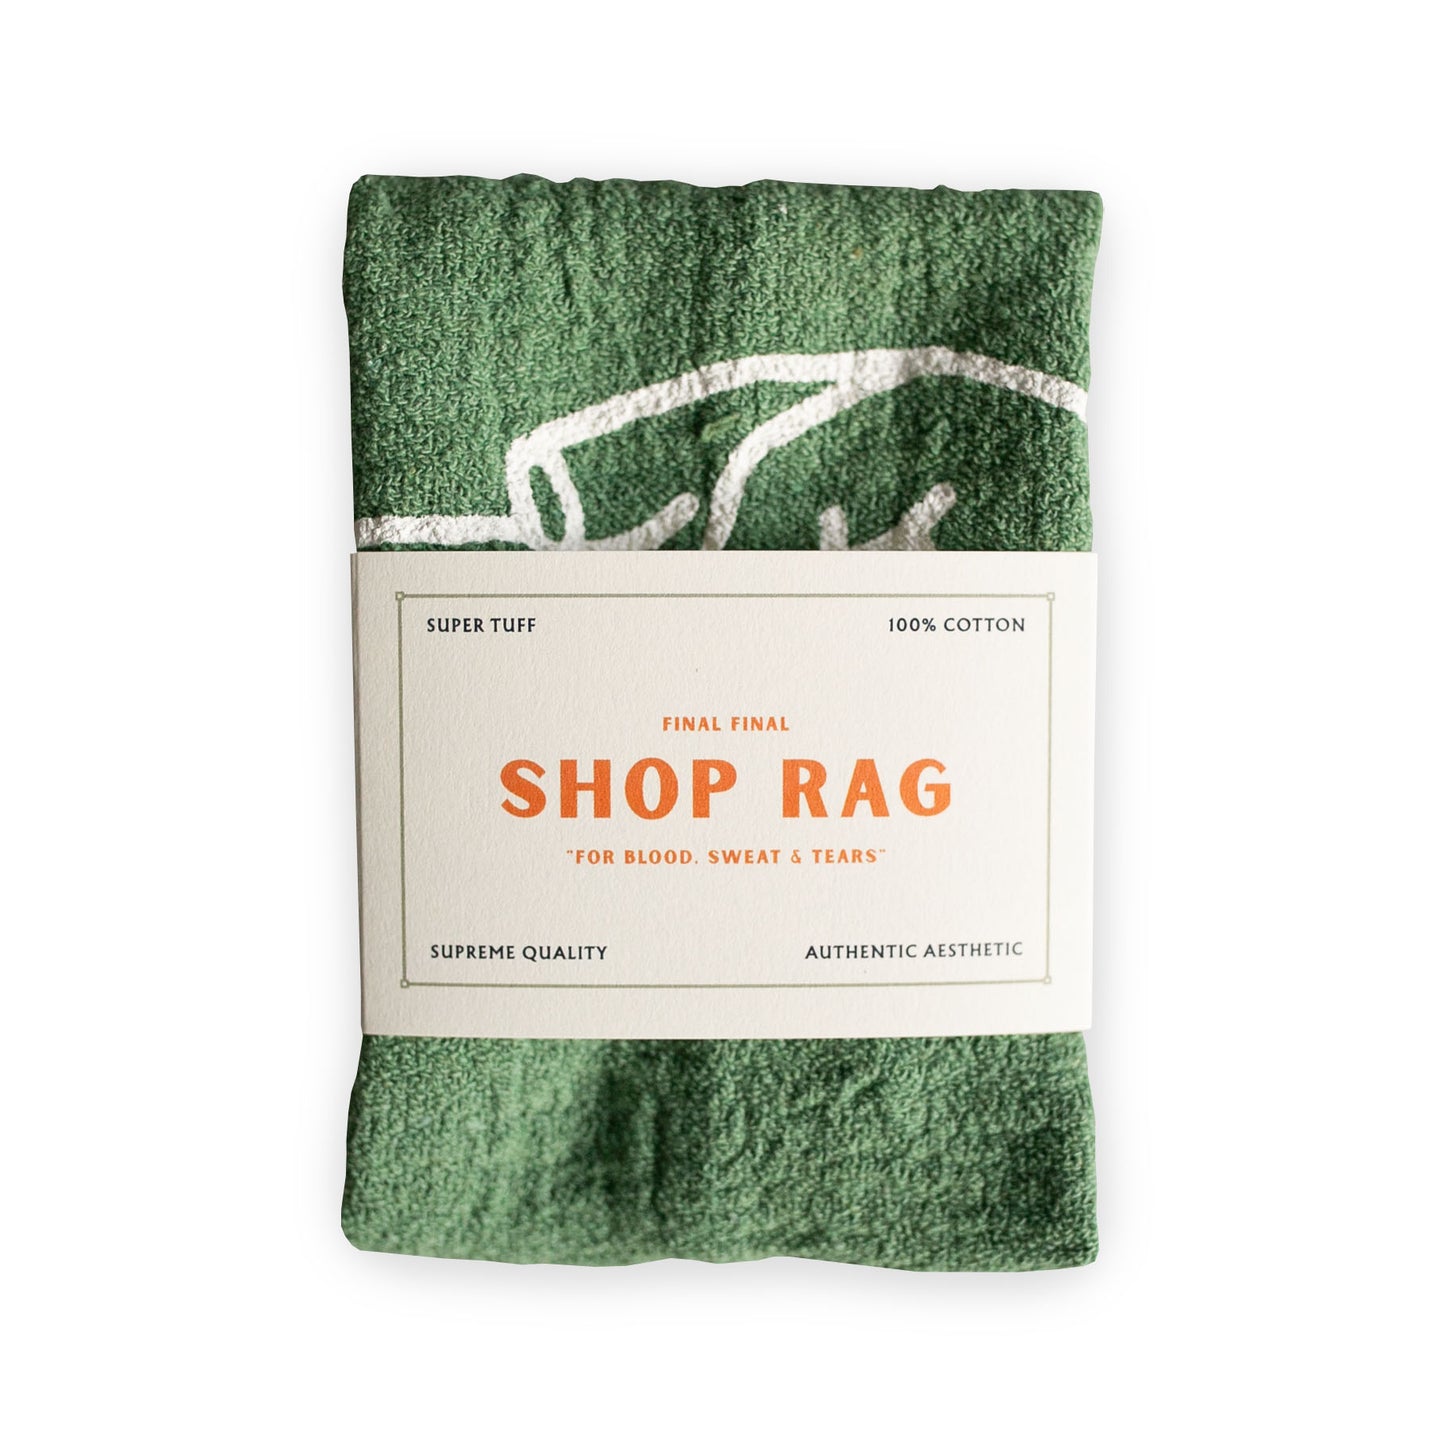 Make Your Own Luck Shop Rag Green